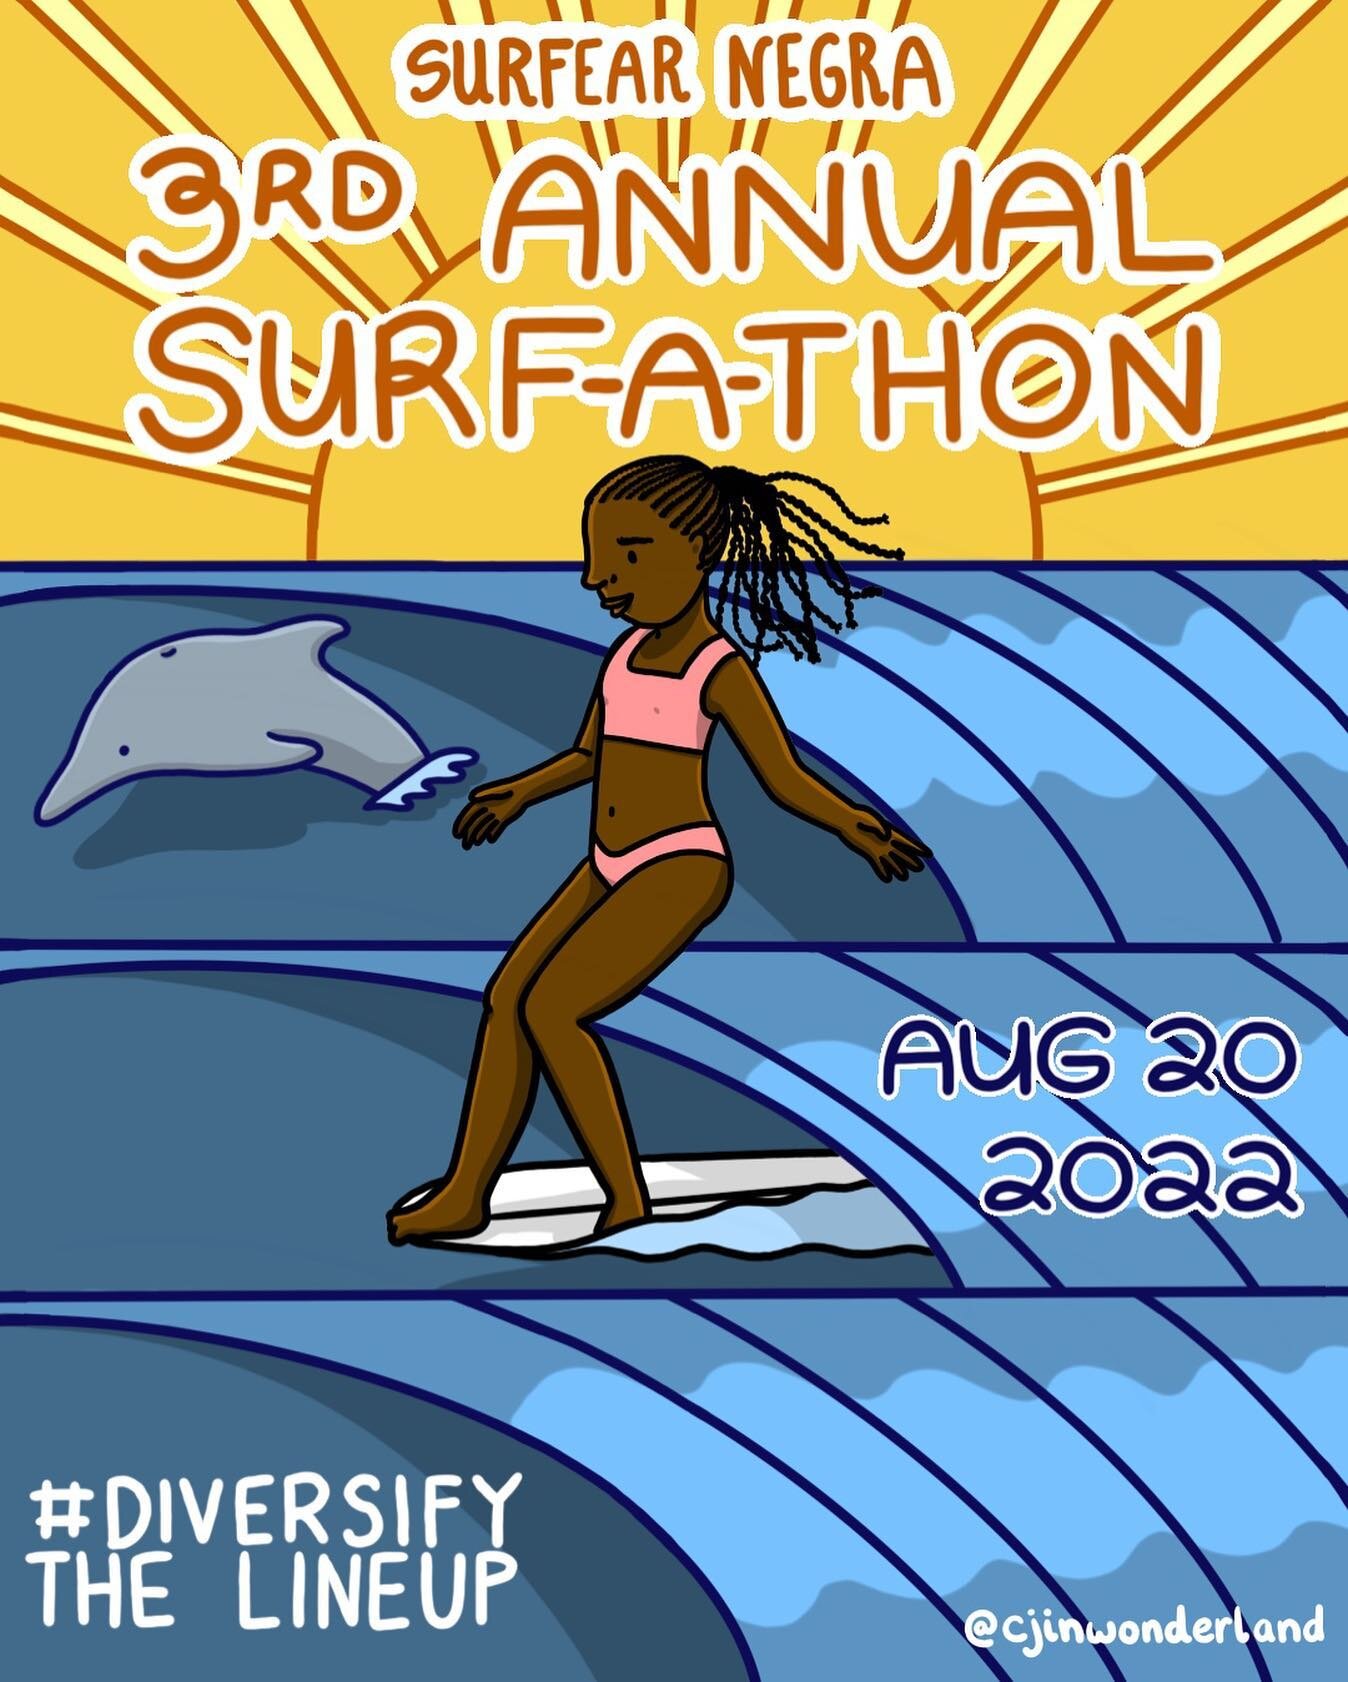 Fun one for @surfearnegra&rsquo;s 3rd Annual Surf-A-Thon, which is tomorrow!!! I believe they need more volunteers if anyone&rsquo;s in the area and wants to support 🌞 I&rsquo;ll be there volunteering and signing posters!
.
.
.
.
.
#surf #surfing #s